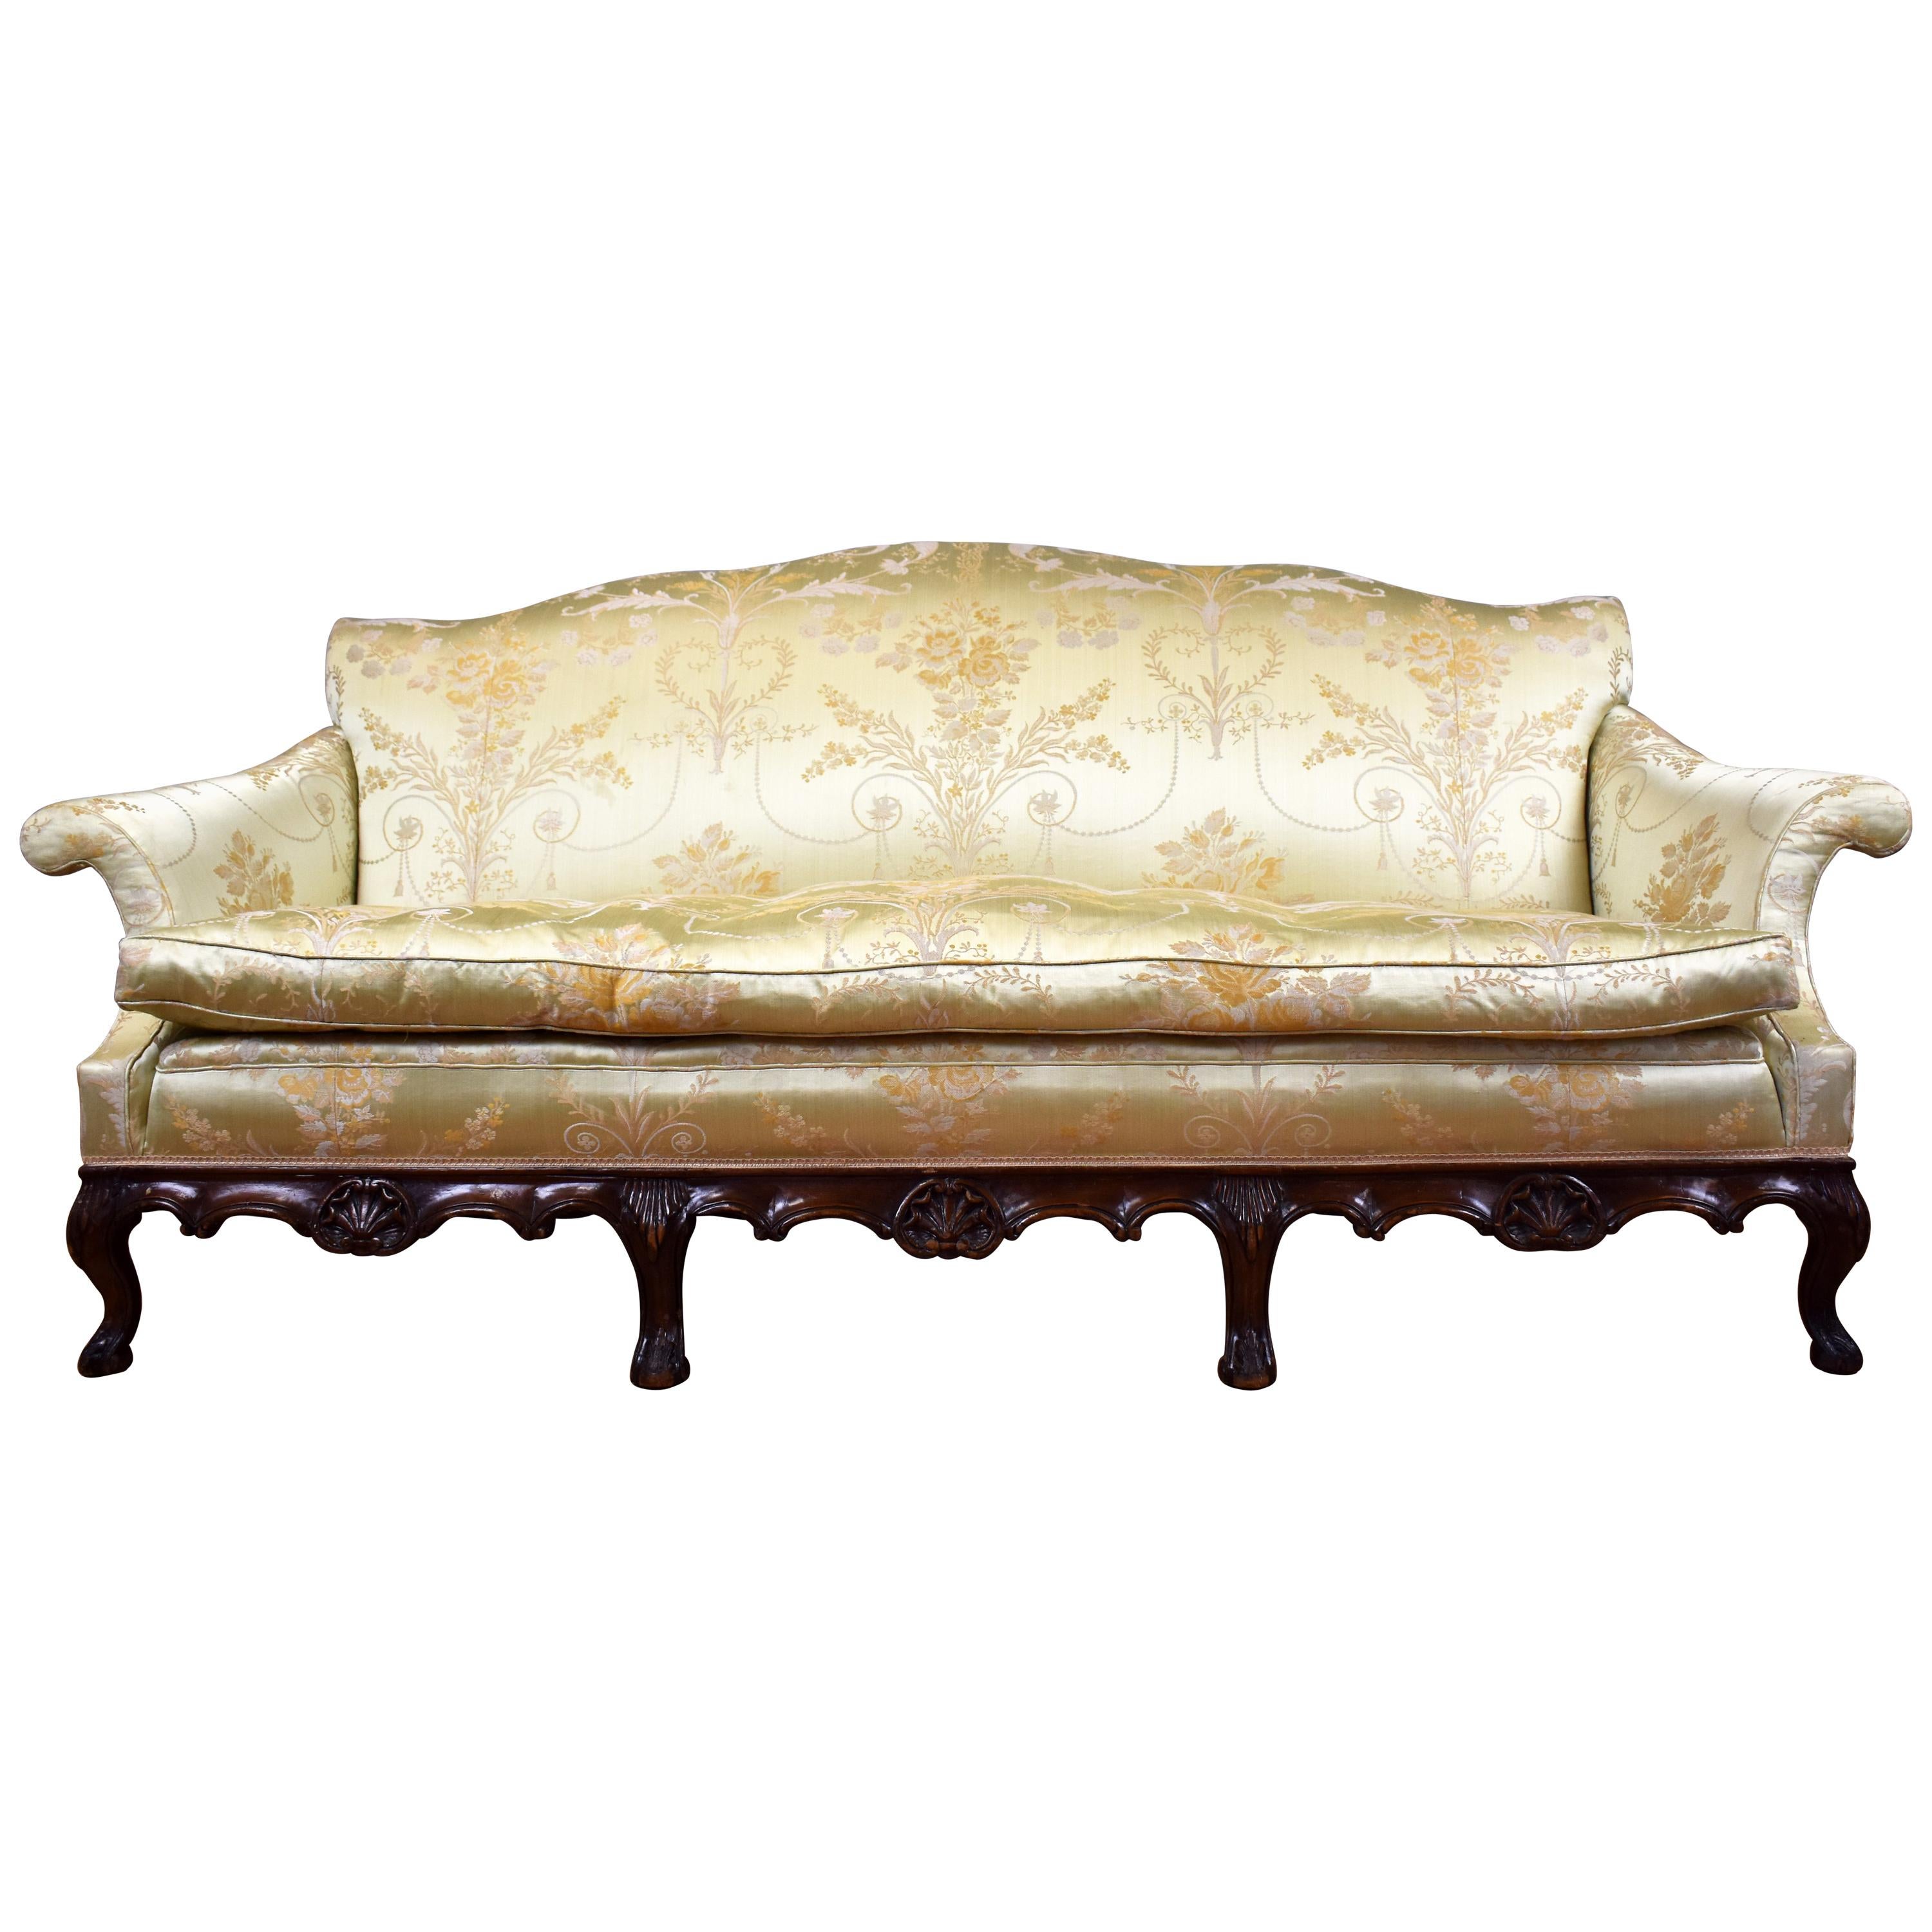 20th Century English Queen Anne Style Sofa